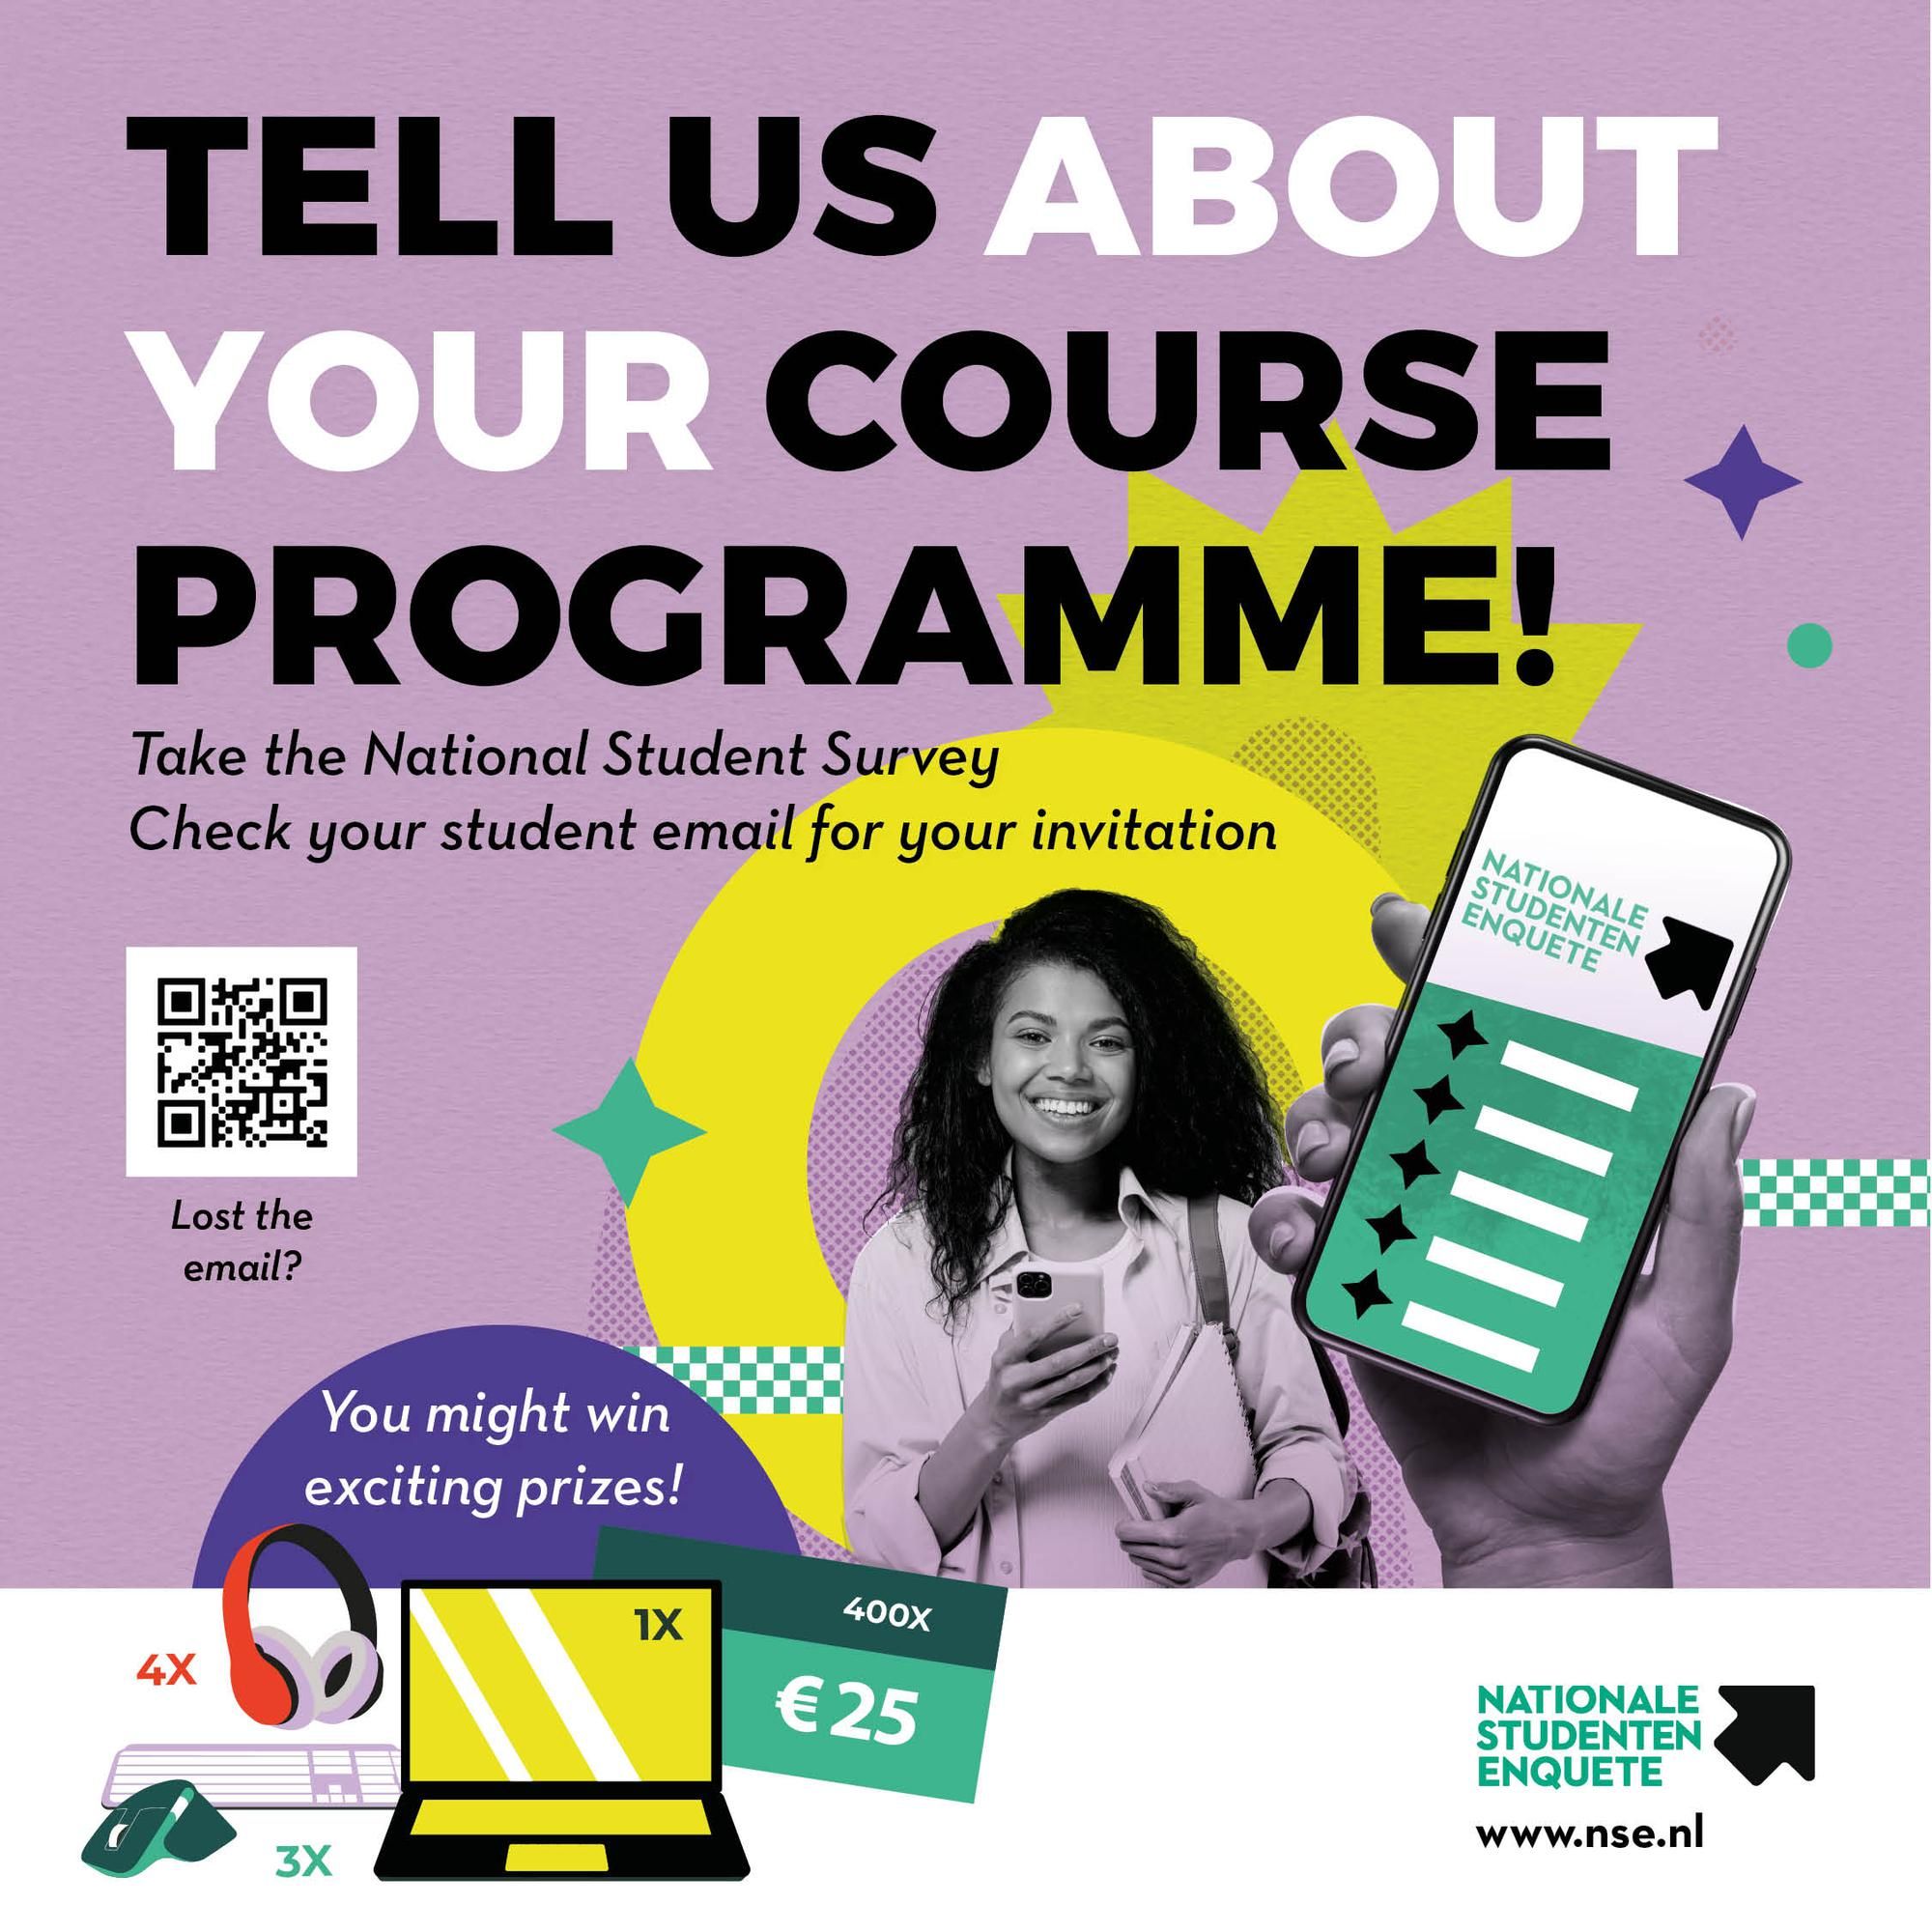 Tell us about your course programme